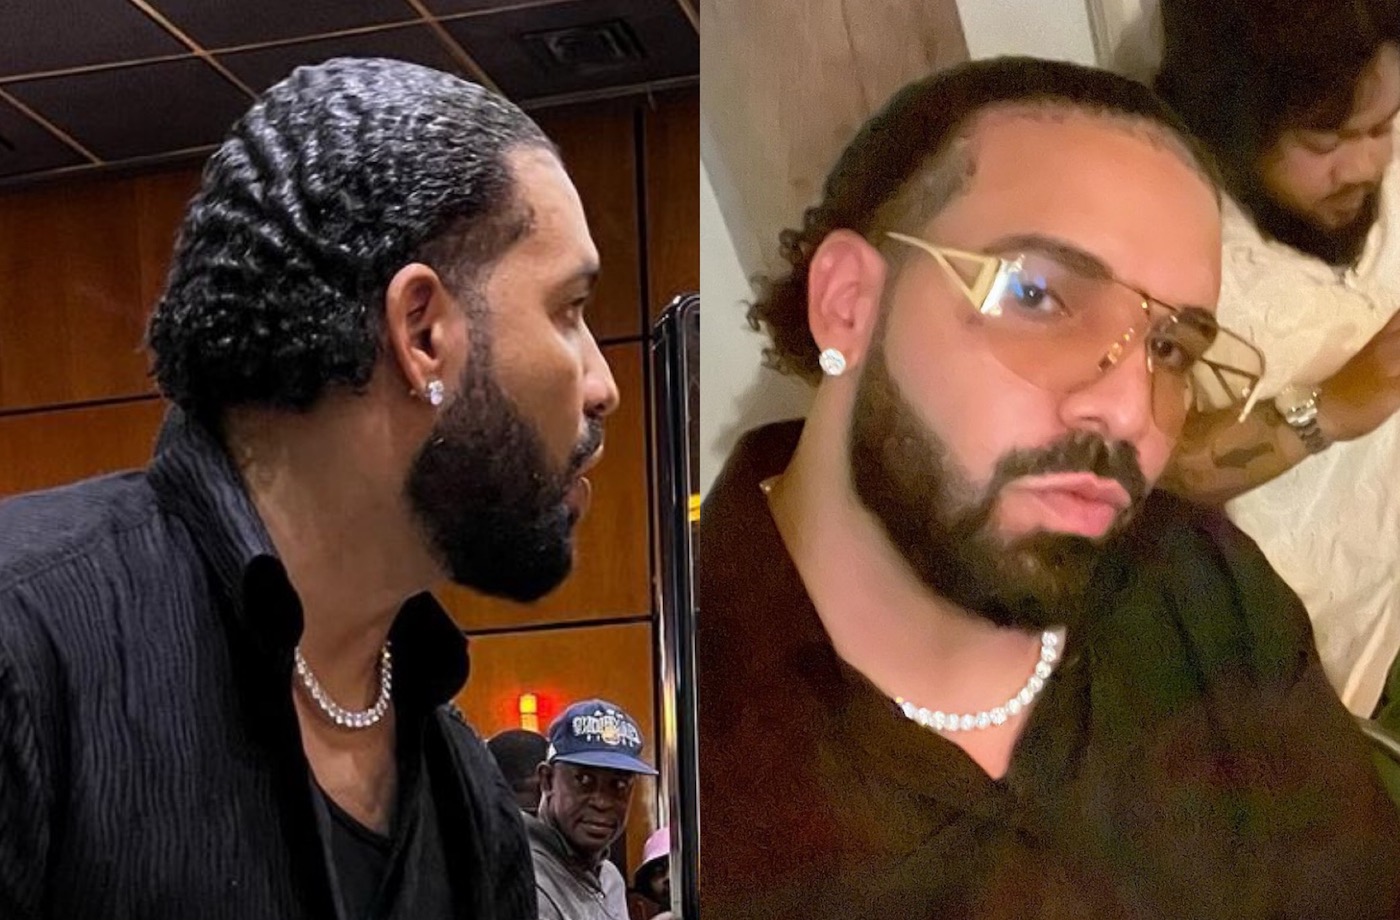 Share 78+ drake new hairstyle best - in.eteachers